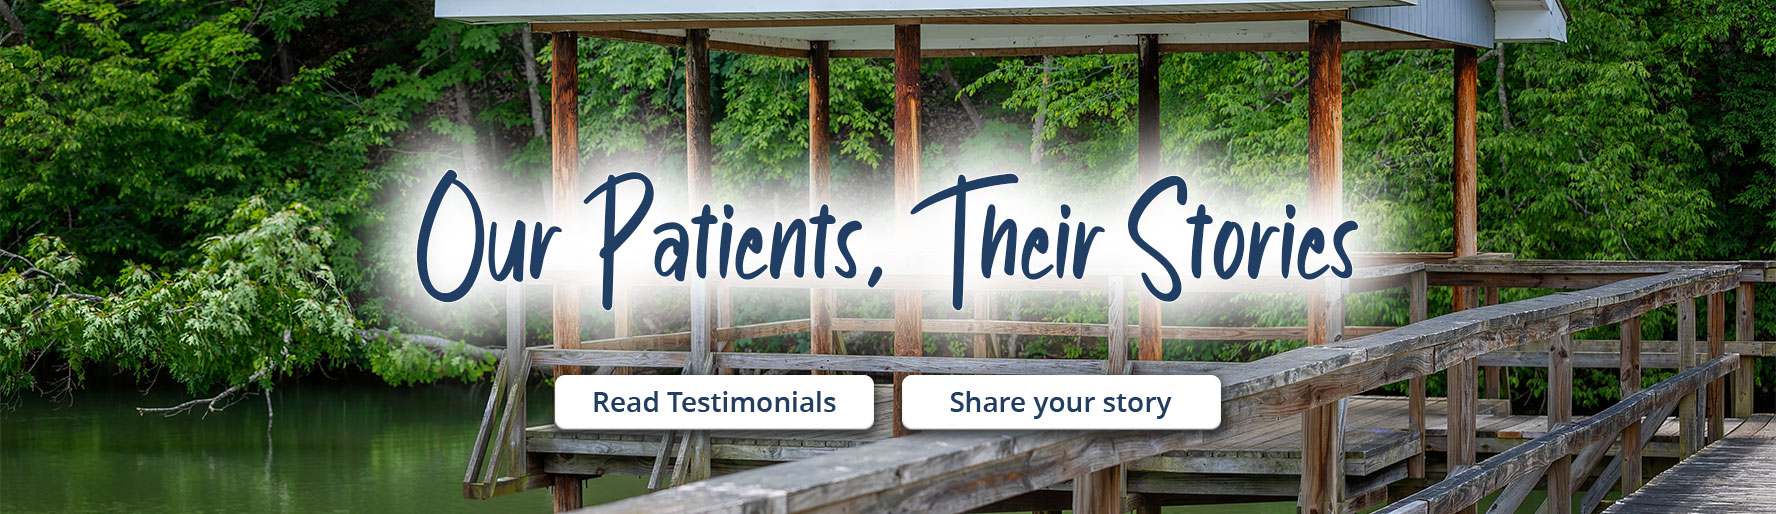 Our Patients,
Their Stories
Read Testimonials
Share Your Story